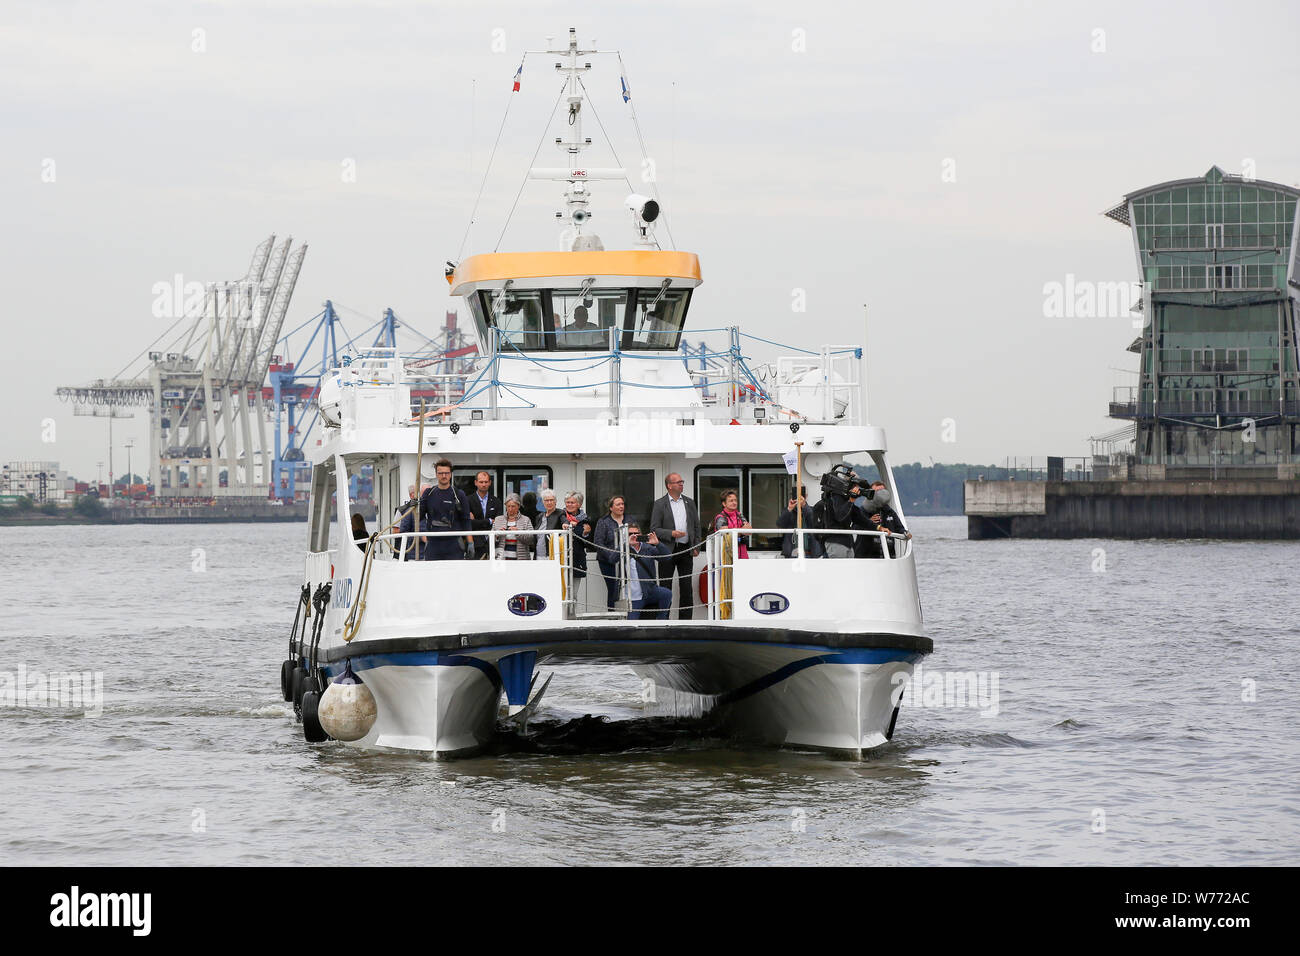 Hamburg, Germany. 05th Aug, 2019. The Elbe ferry 'Liinsand' sails in the port of Hamburg. A new ferry service on the Elbe started operation on Monday, 05.08.2019. The passenger ferry will run three times a day between Stade (Stadersand), Wedel and Hamburg on the Elbe. It has a hybrid drive (diesel/electric) and can carry 50 passengers and 15 bicycles. Credit: Bodo Marks/dpa/Alamy Live News Stock Photo